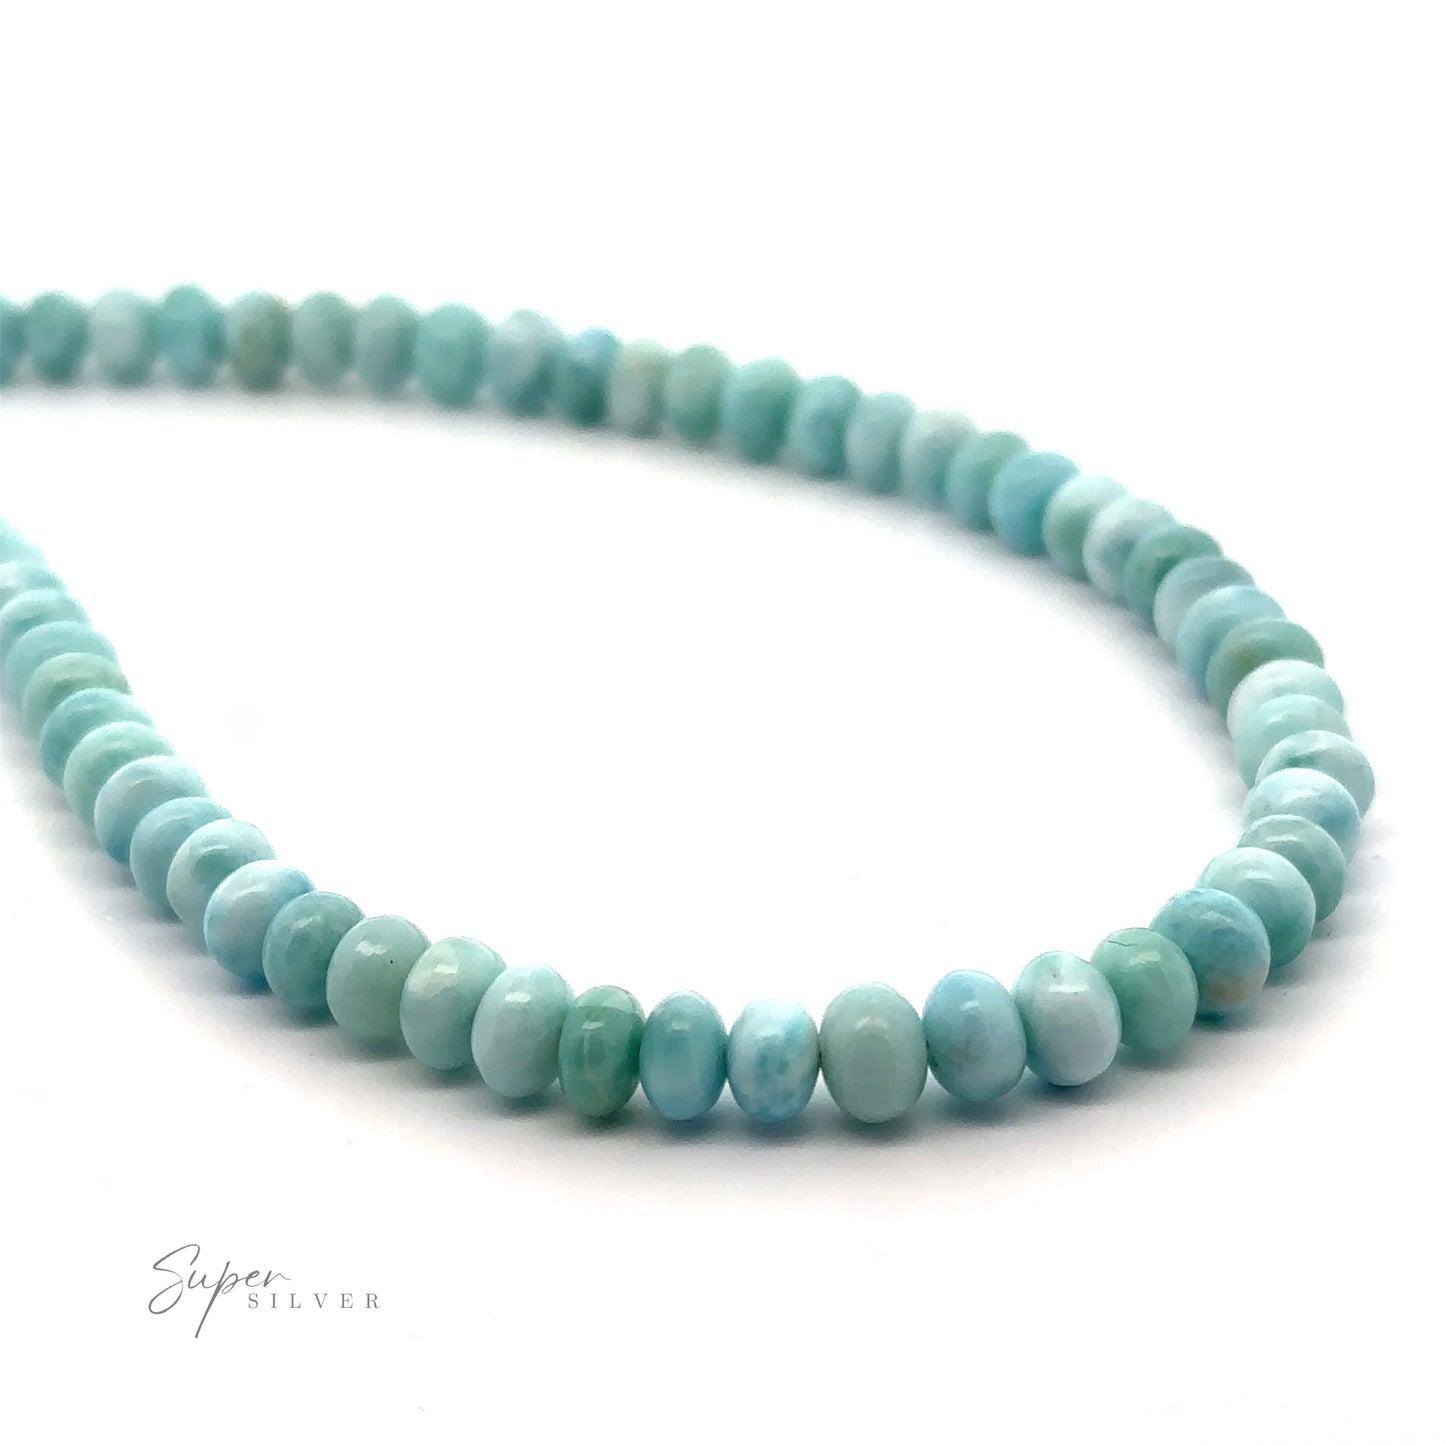 
                  
                    A Larimar Beaded Necklace with light blue-green round beads arranged in a continuous loop on a white background. The text "Super Silver" is visible in the bottom left corner.
                  
                